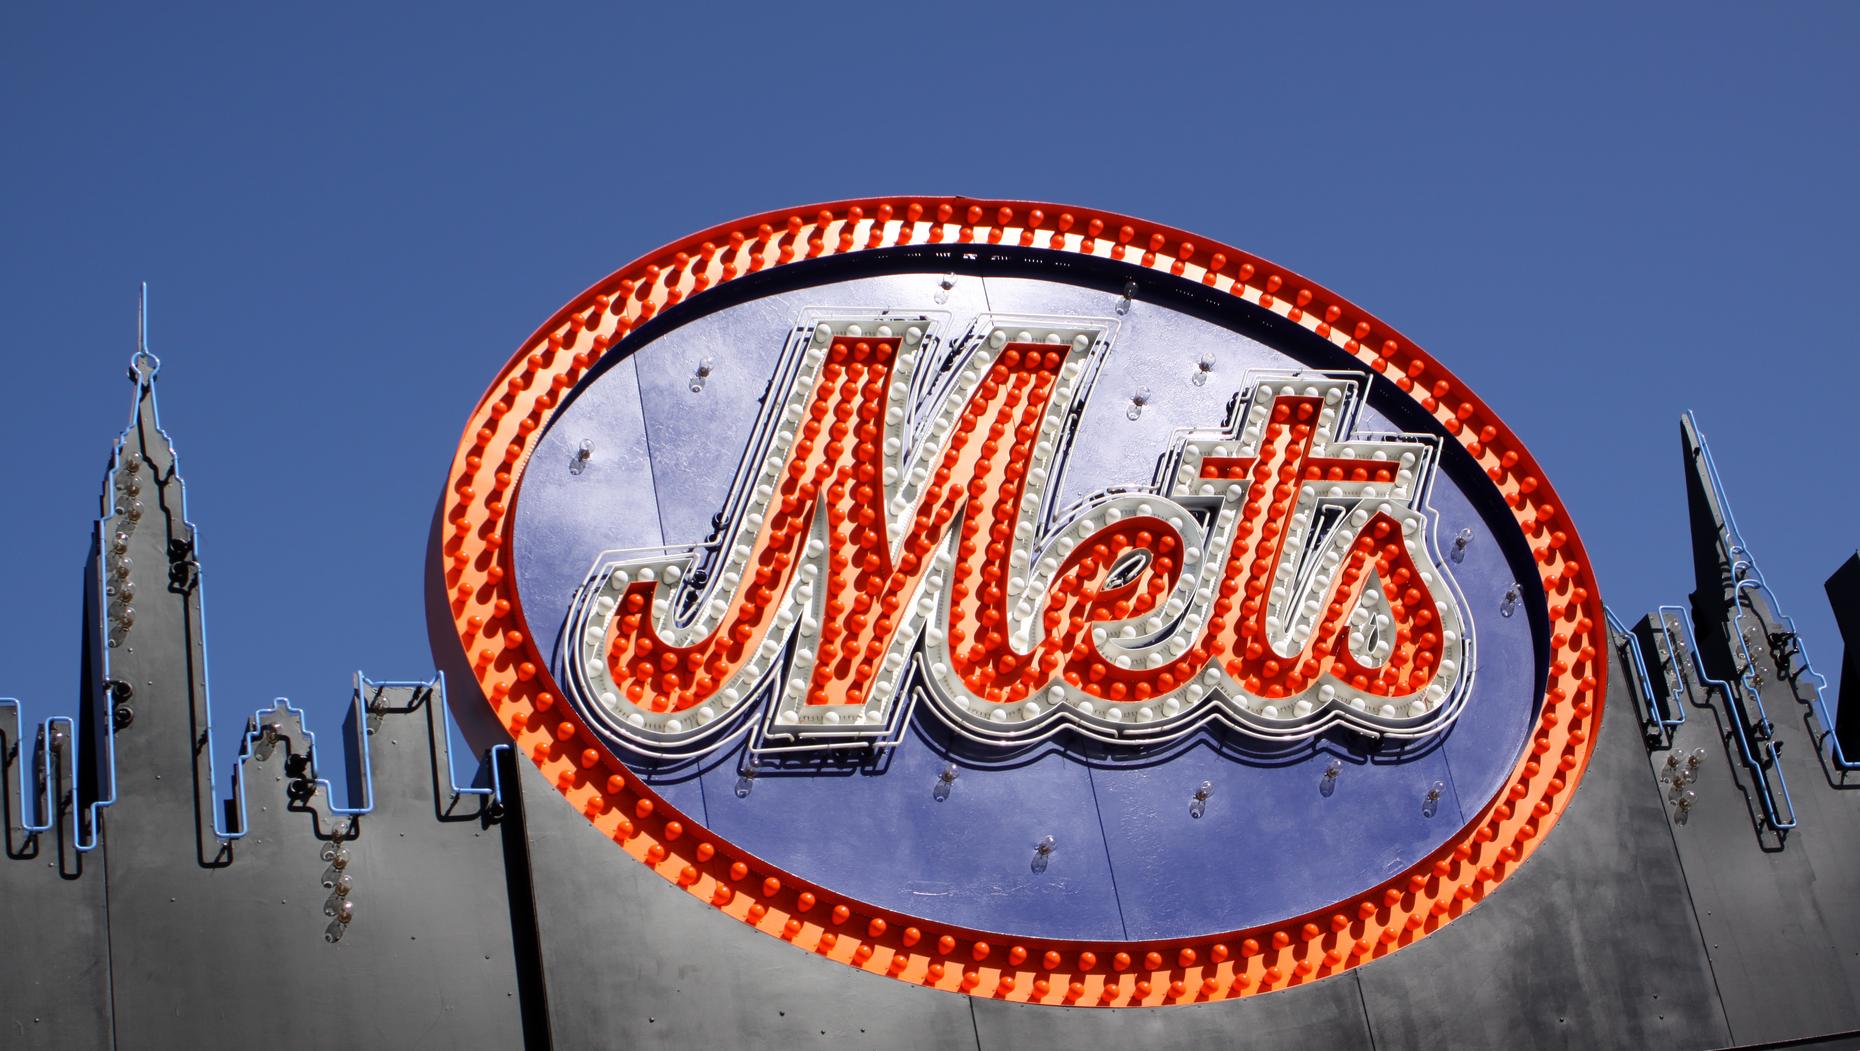 FOCO Says Meet The Mets, Step Right Up And Greet The Mets